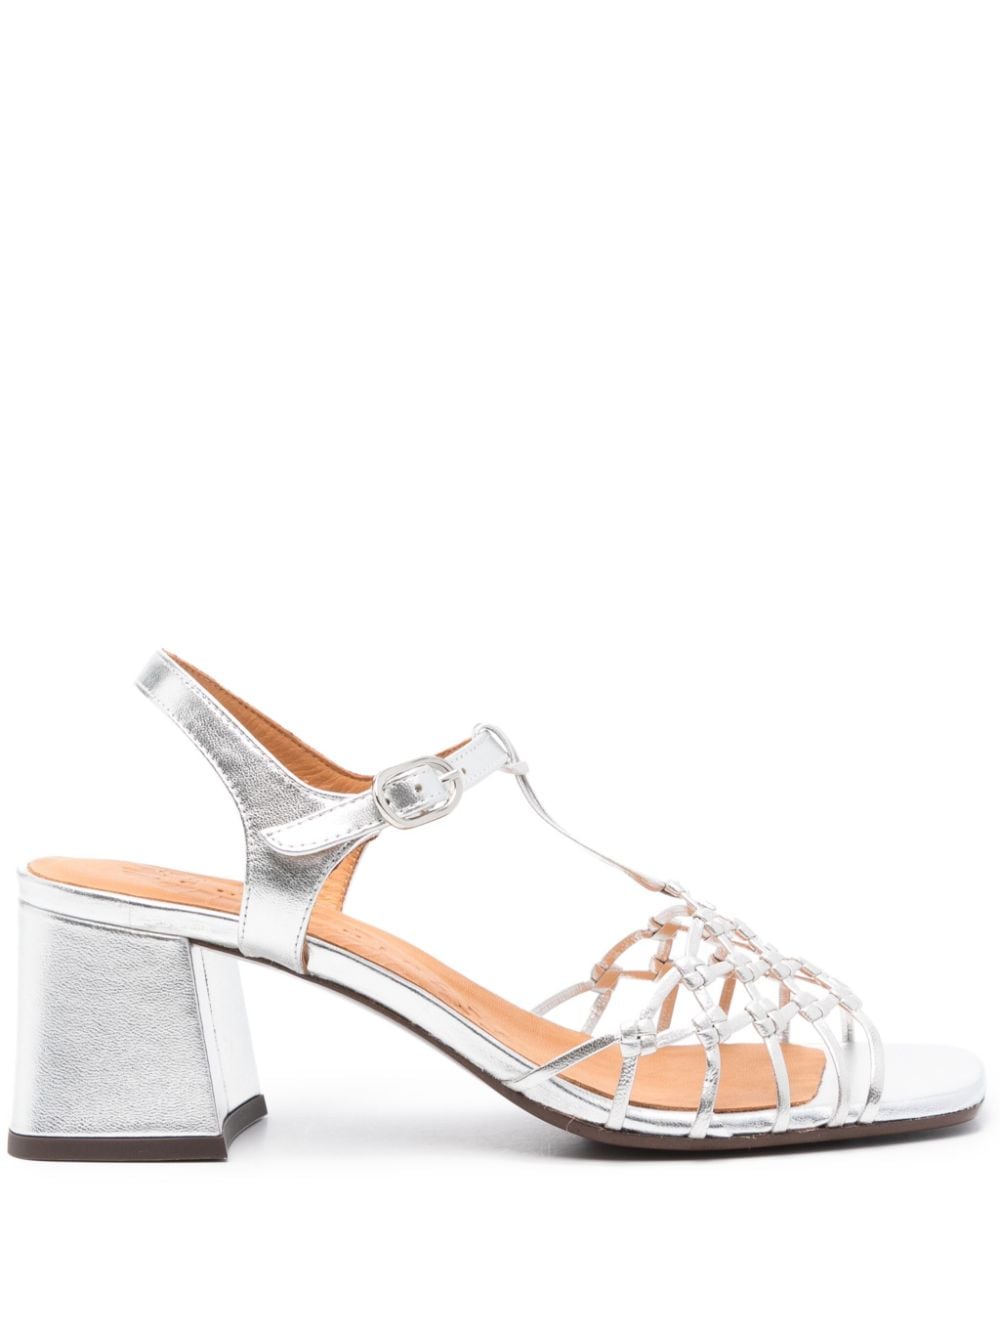 Chie Mihara Lantes 60mm leather sandals - Silver von Chie Mihara